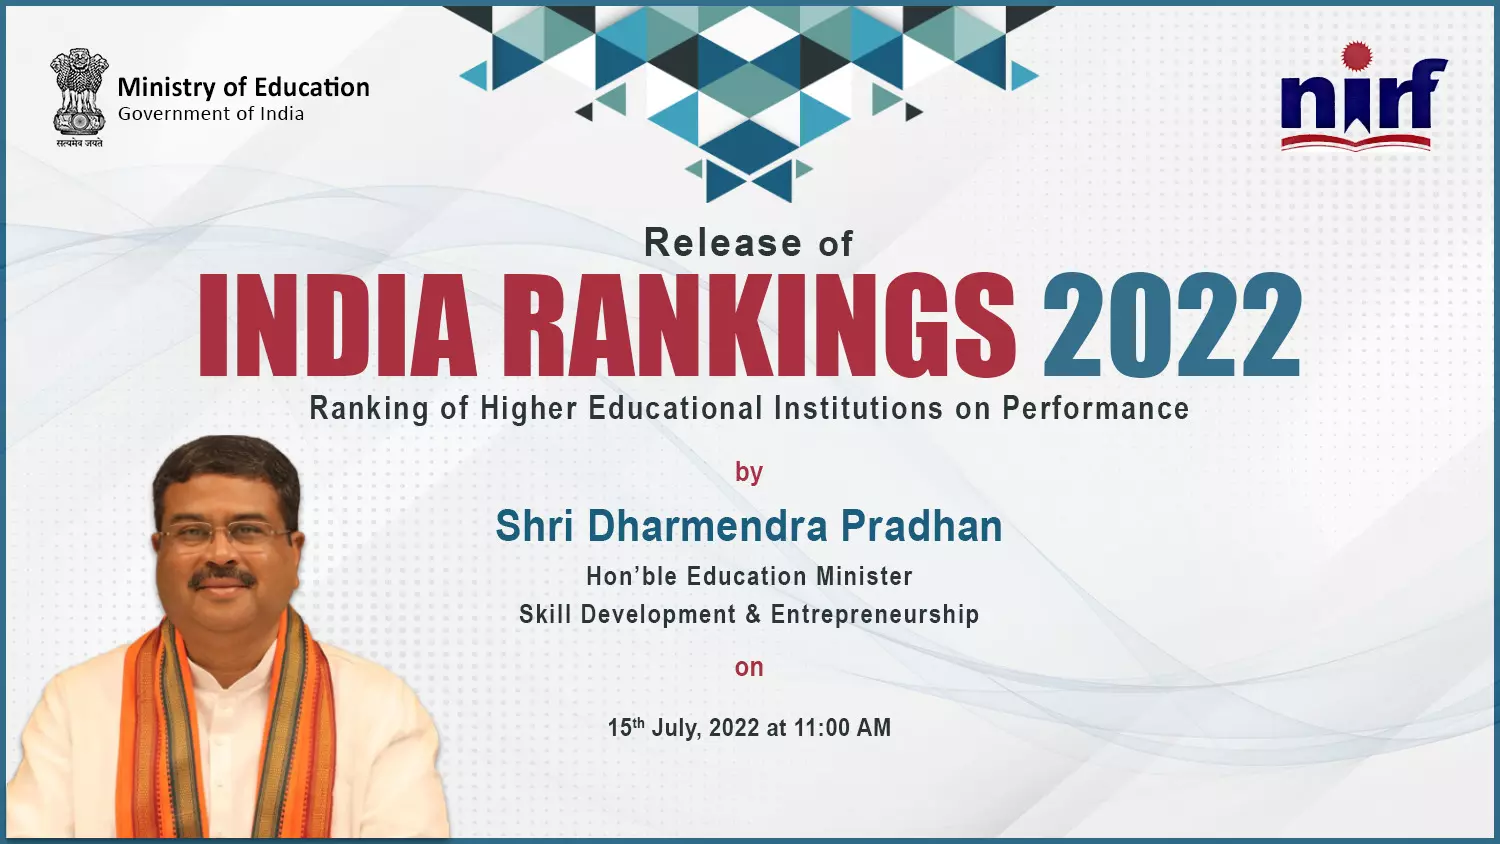 IIT Madras is the number one University in NIRF Ranking, IISc is Second, and Lucknows BBAU is on the 78th position.